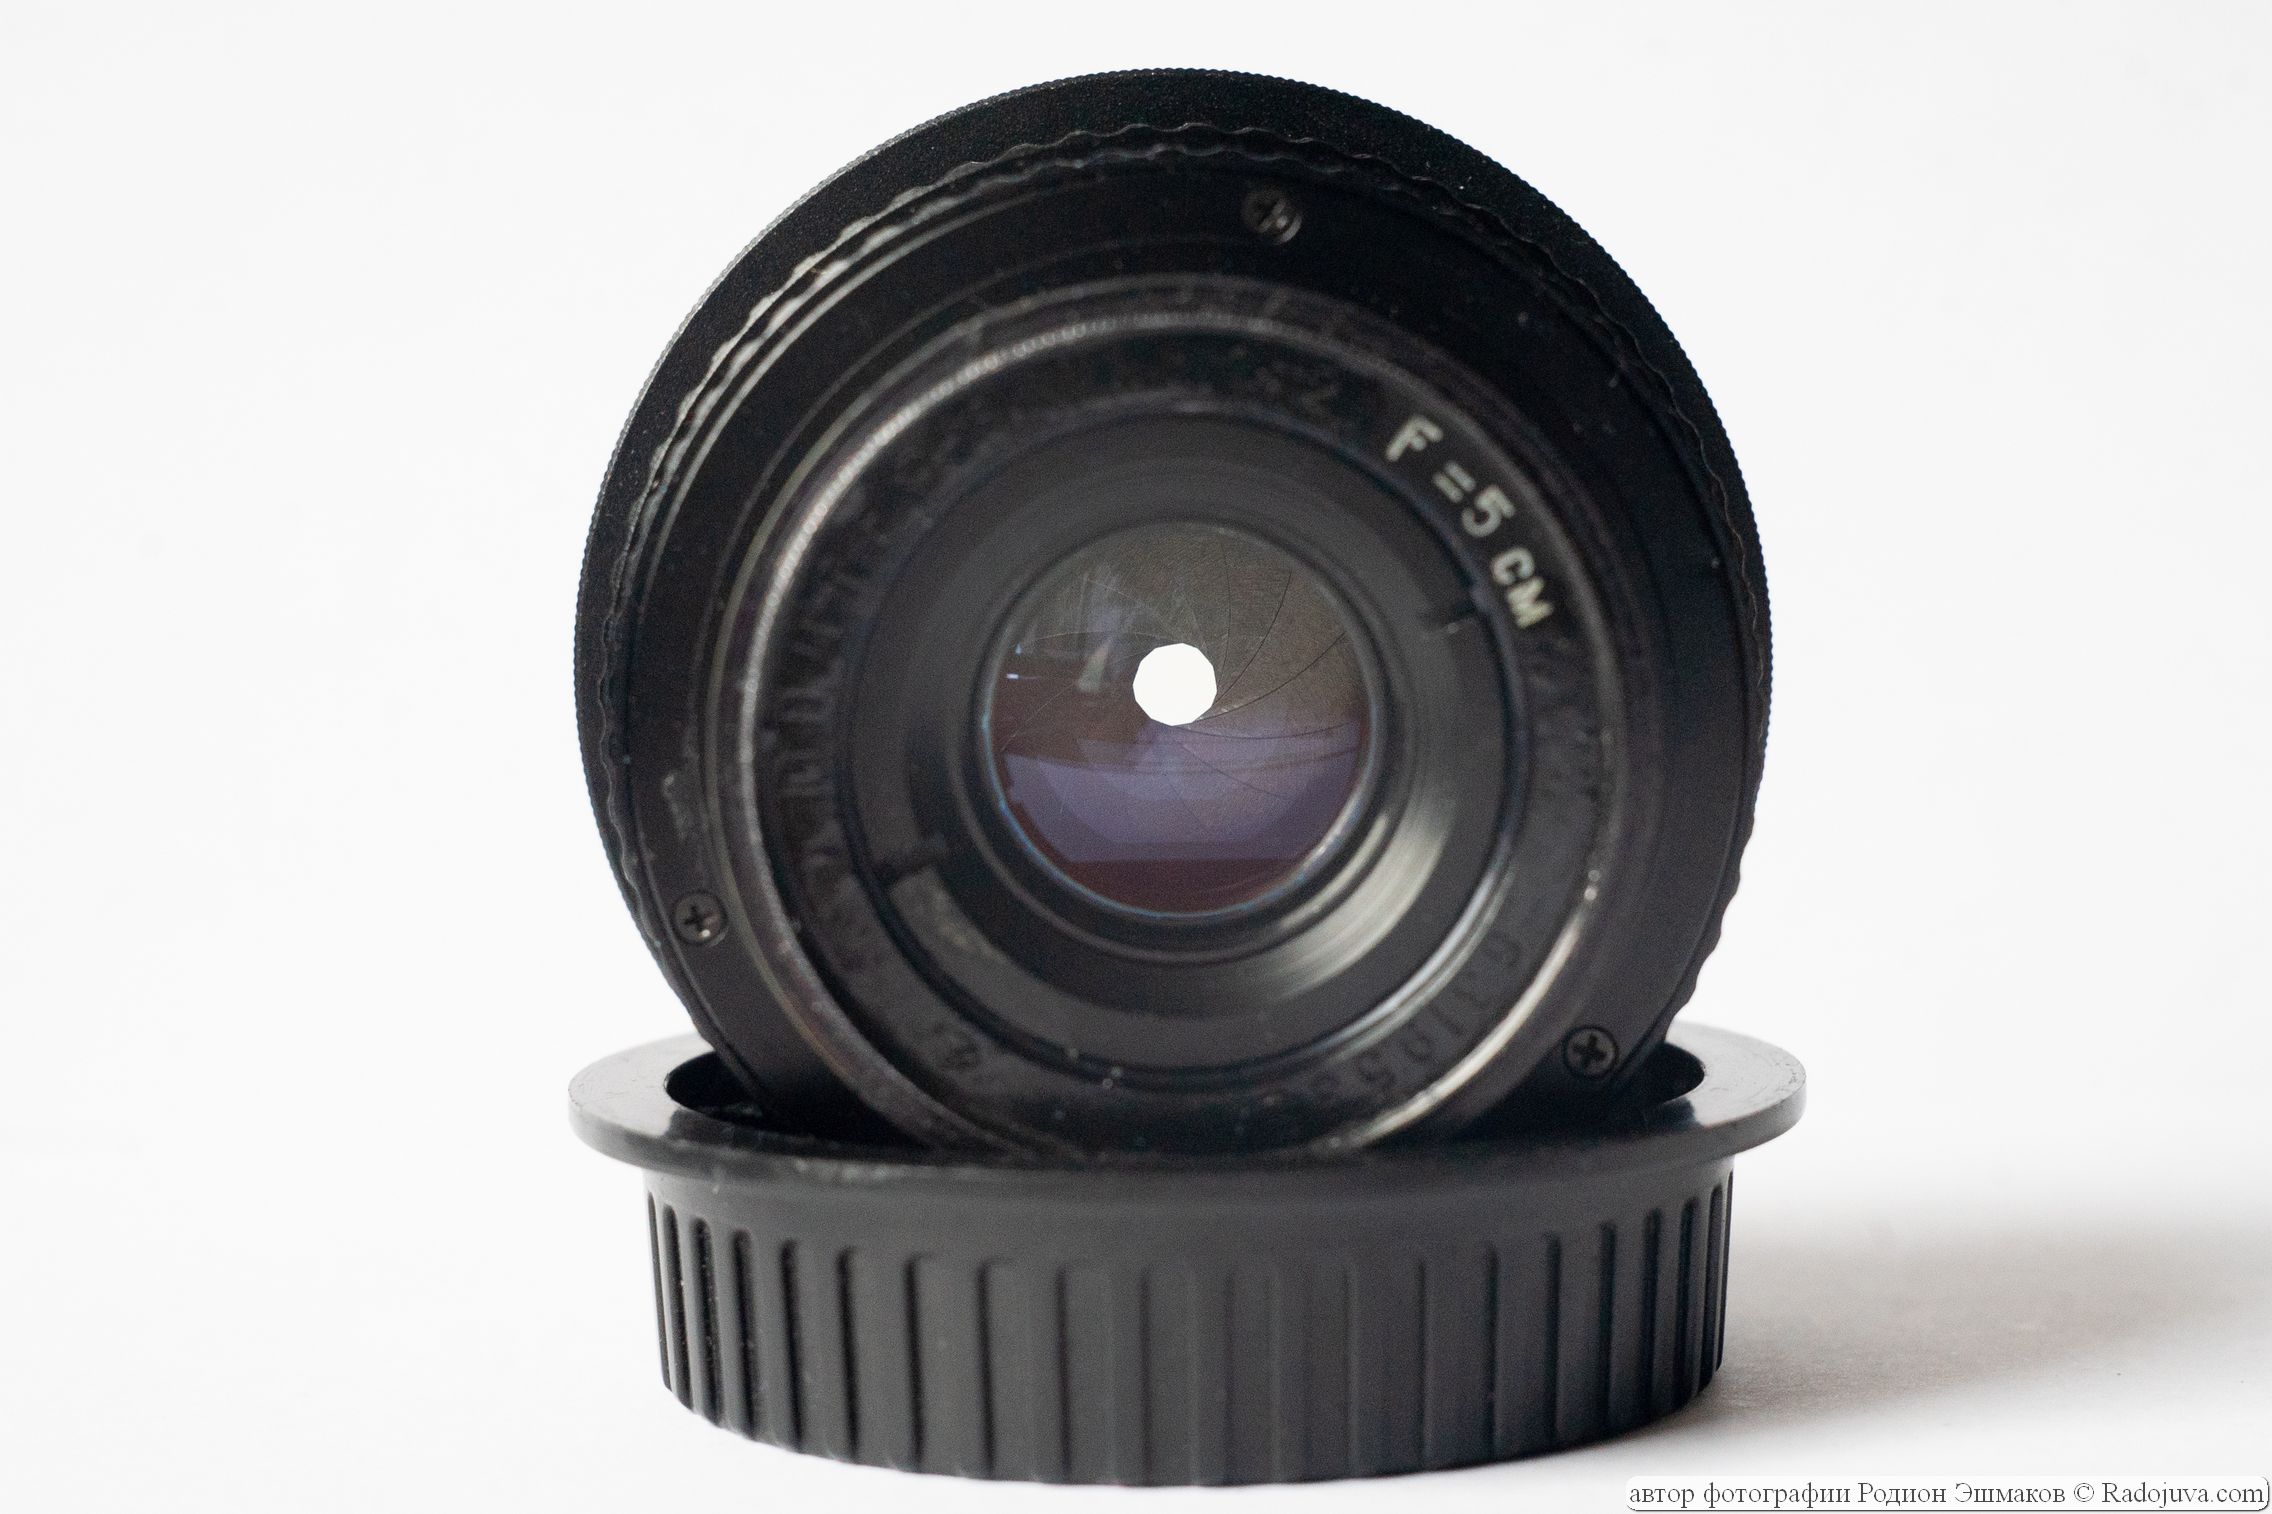 View of the lens through the lens with a closed aperture.